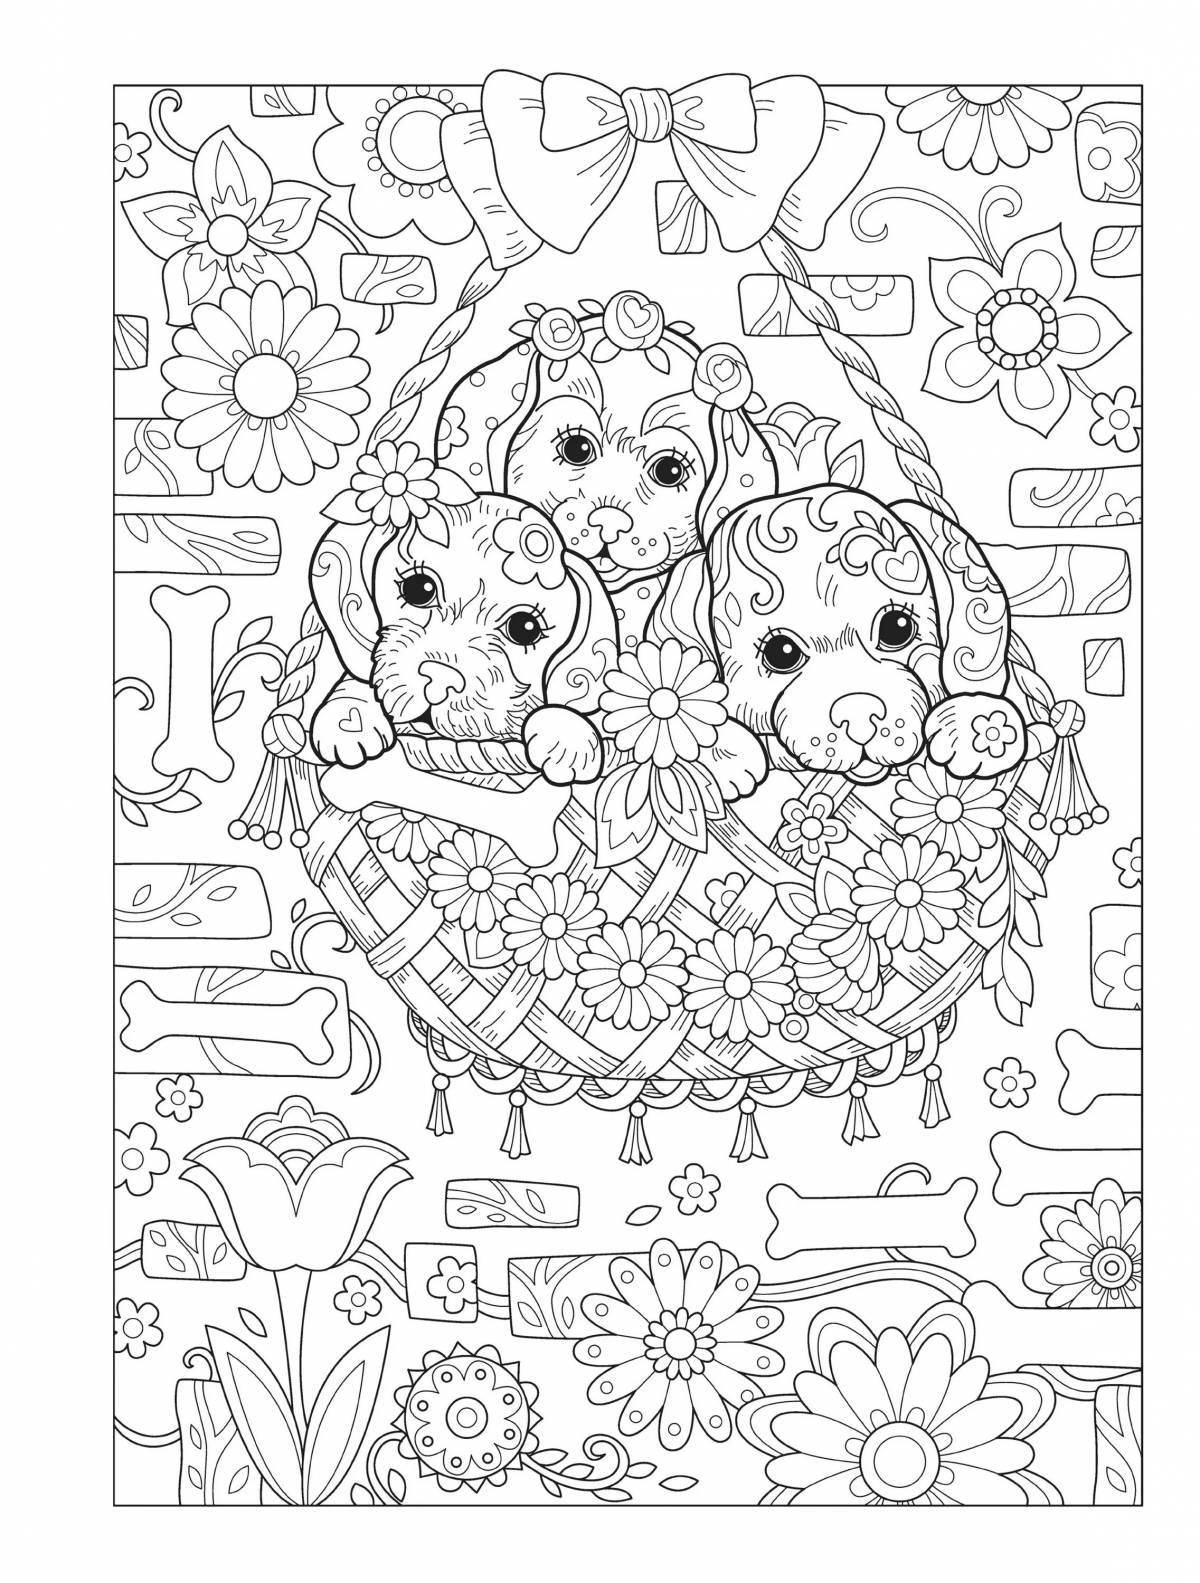 Joyful anti-stress coloring book for children 8 years old